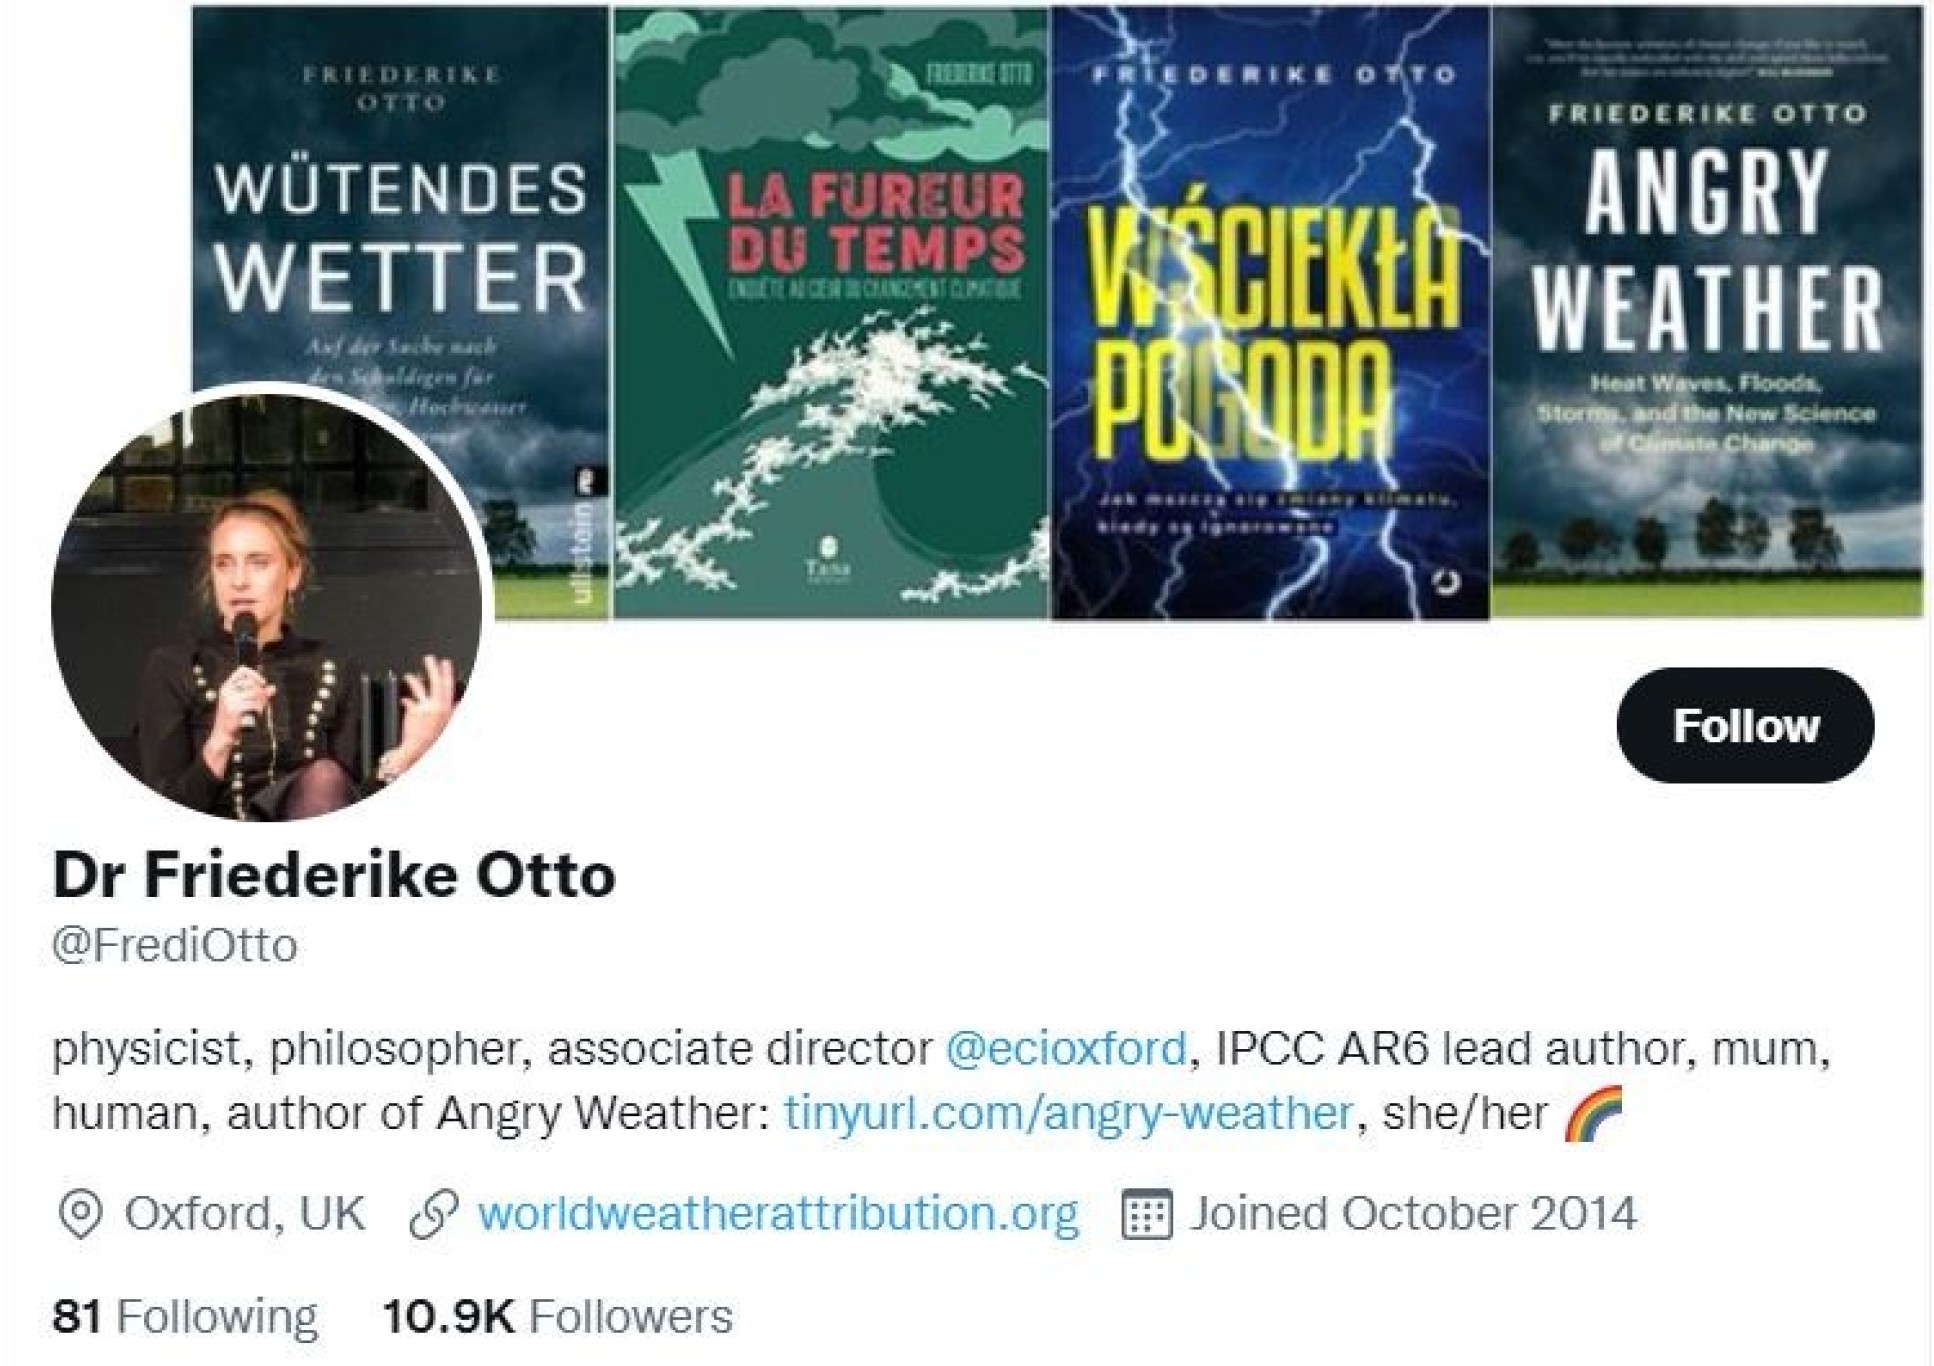 Screen shot of Dr Otto's Twitter bio reads: Dr Friederike Otto, @FrediOtto: physicist, philosopher, associate director @ecioxford, IPCC AR6 lead author, mum, human, author of Angry Weather, she/her, [Rainbow symbol]. Oxford, UK. Website: worldweatherattribution.org. Joined October 2014. 81 Following, 10.9K Followers